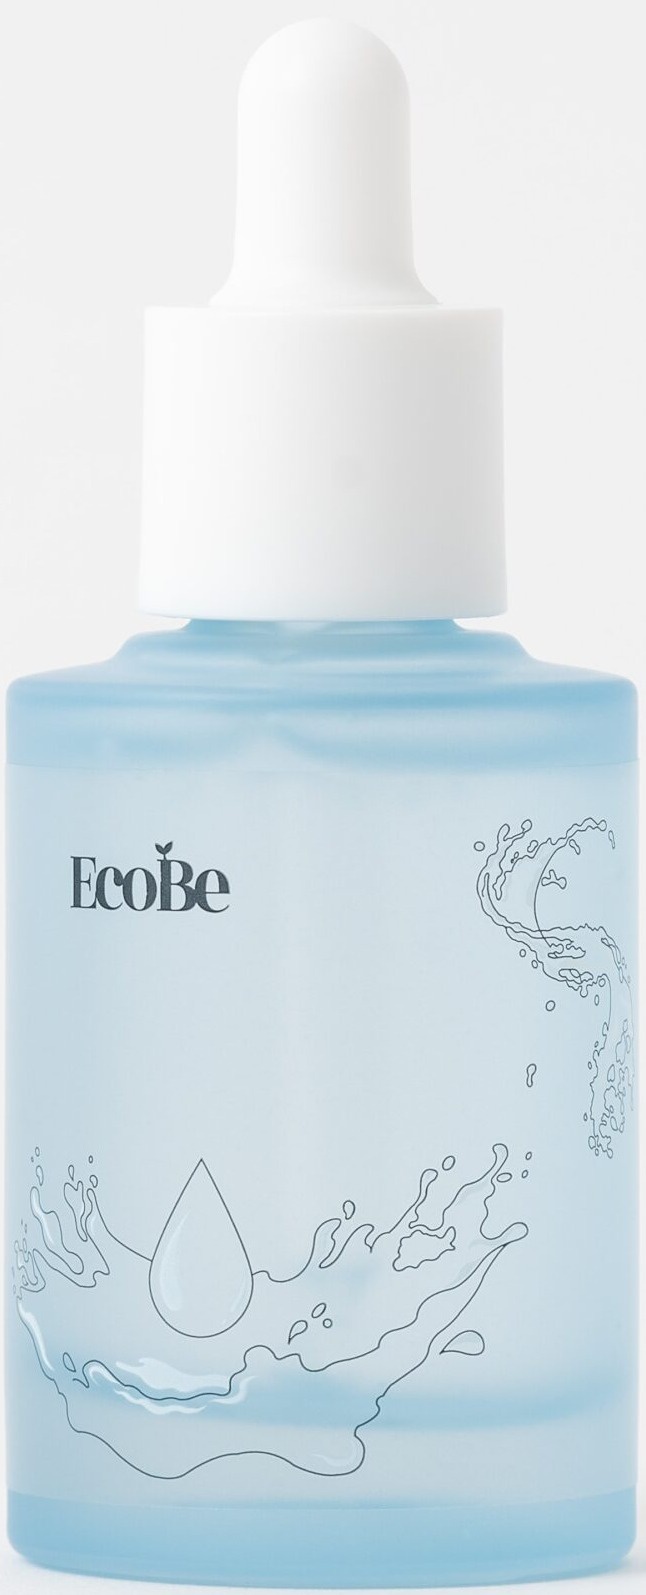 EcoBe Hyaluronic Acid Boosting Ampoule